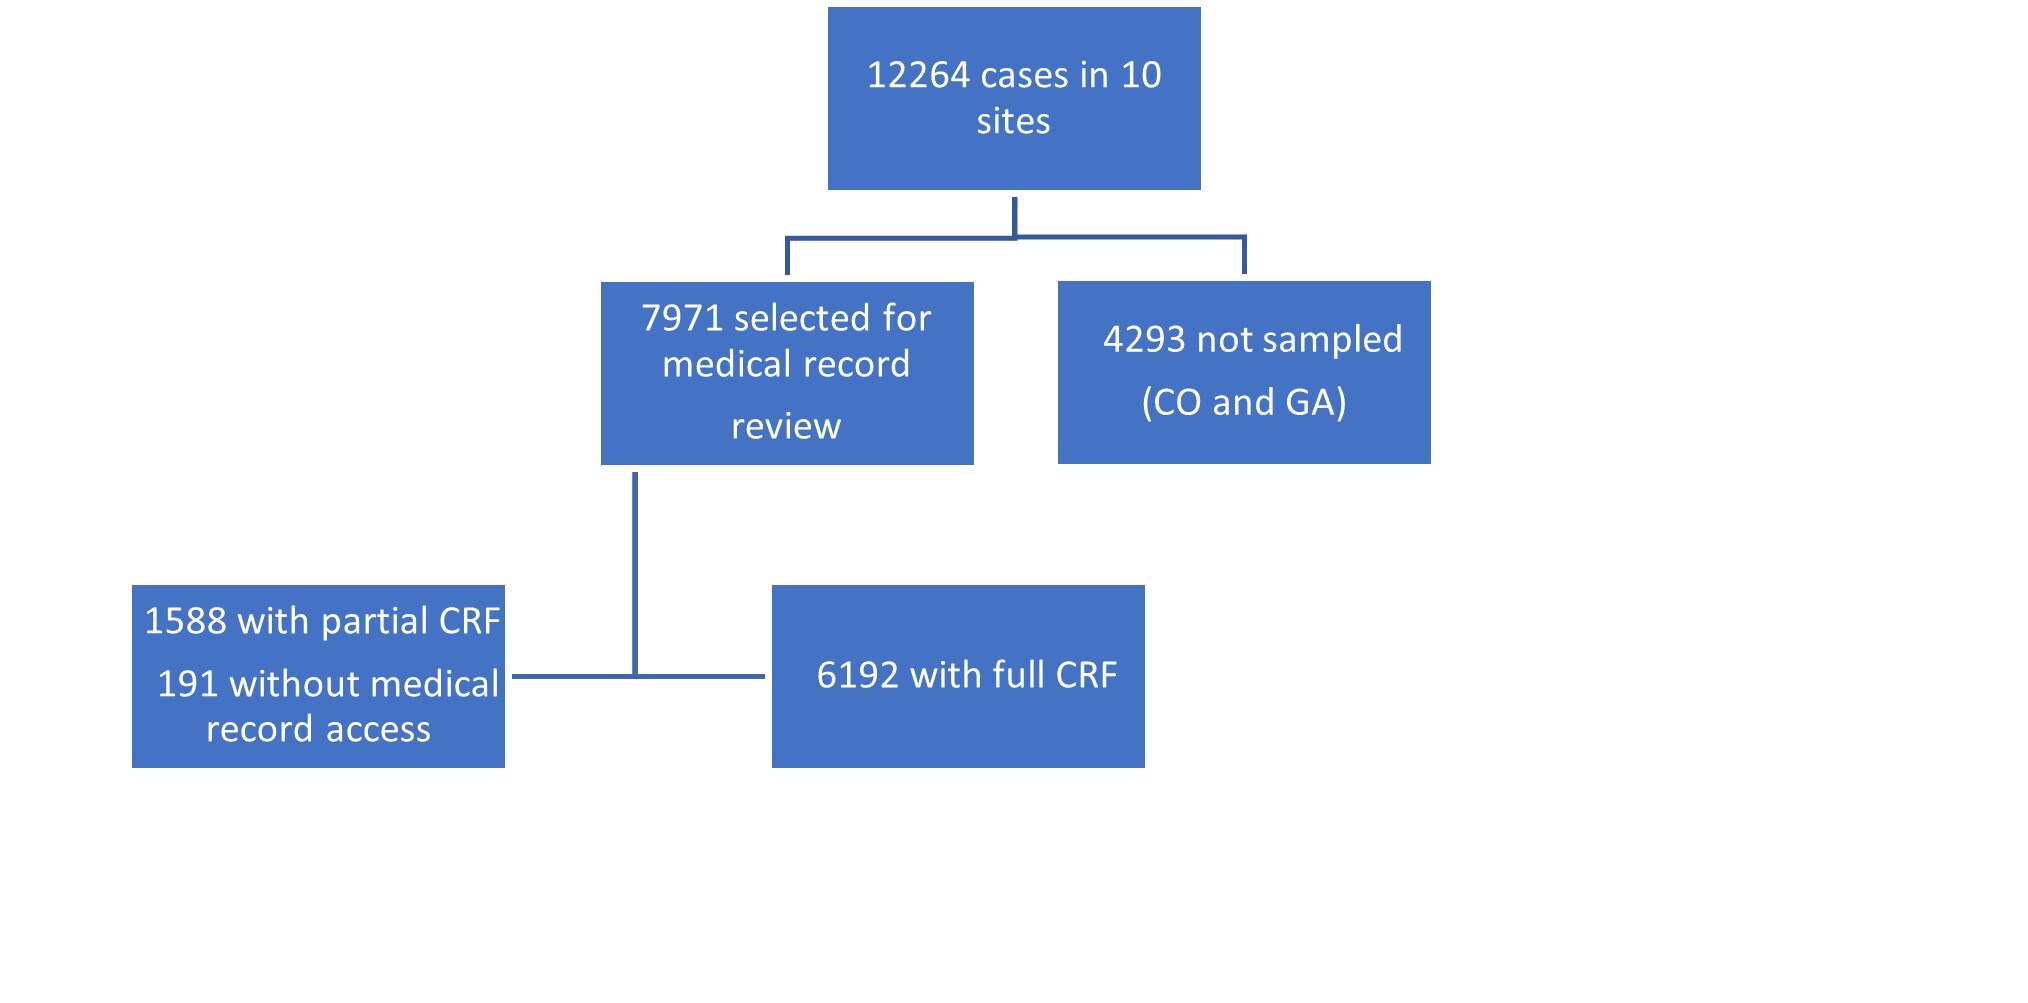 12264 cases in 10 sites, 7971 selected for medical record review, 1588 with partial CRF, 191 without medical record access, 6192 with full CRF, 4293 not sampled (CO and GA)